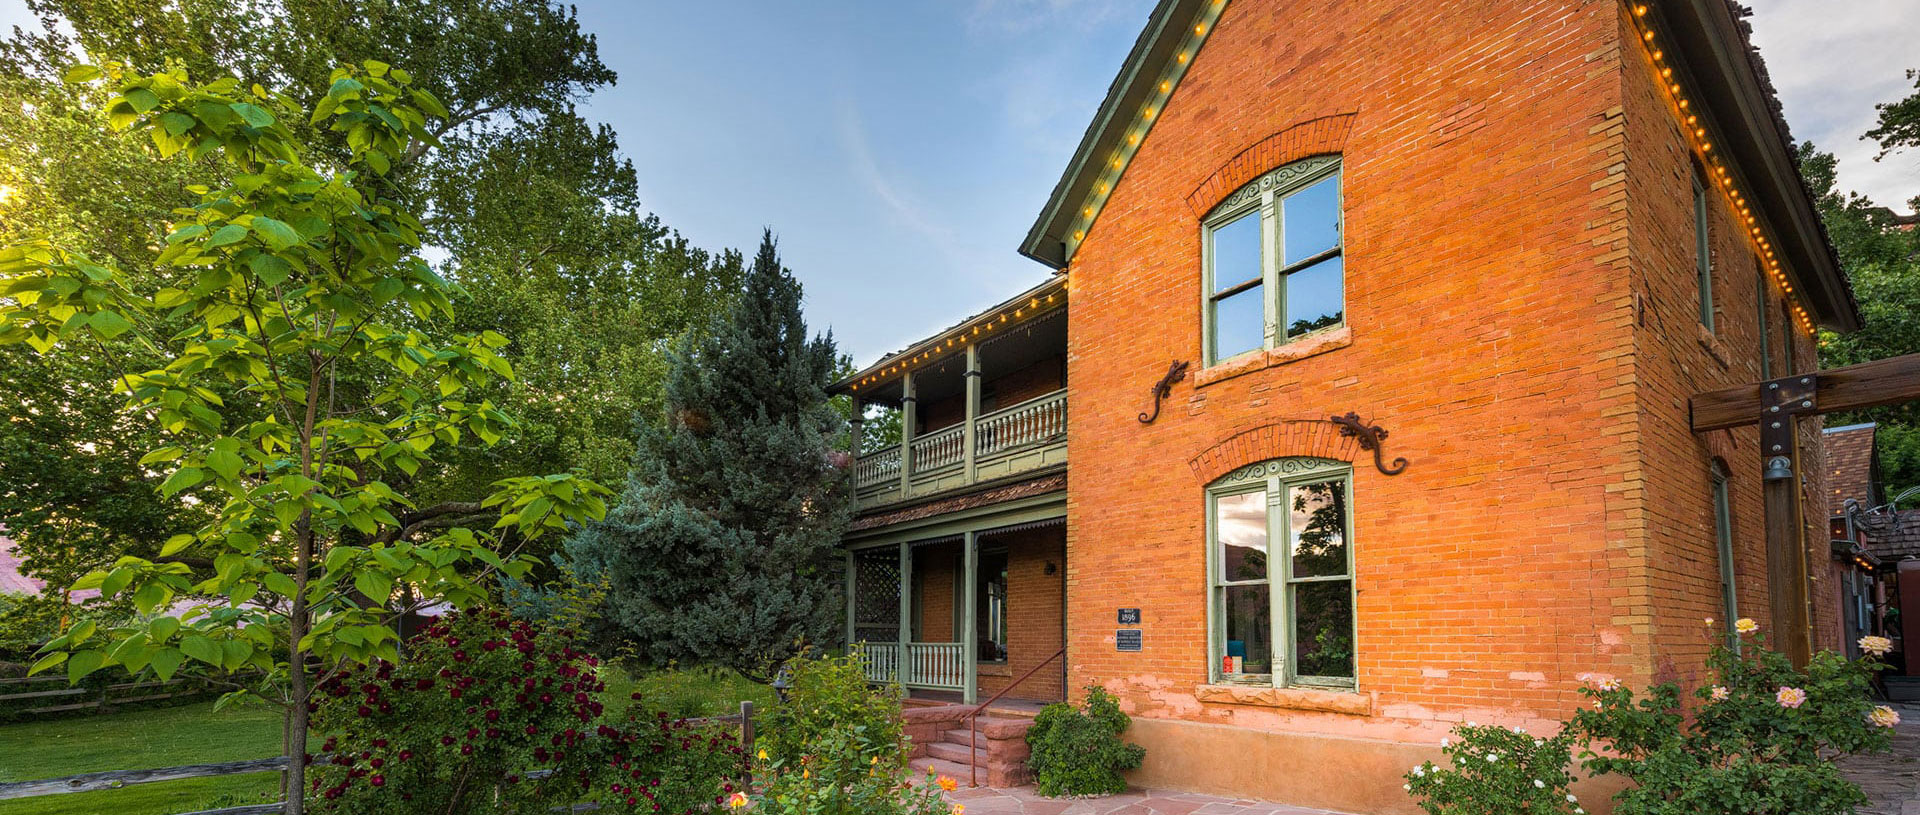 The historic ranch house on the Moab Springs property is a two storey faded red brick structure with a covered balcony on the upper floor overlooking lush vegetation.